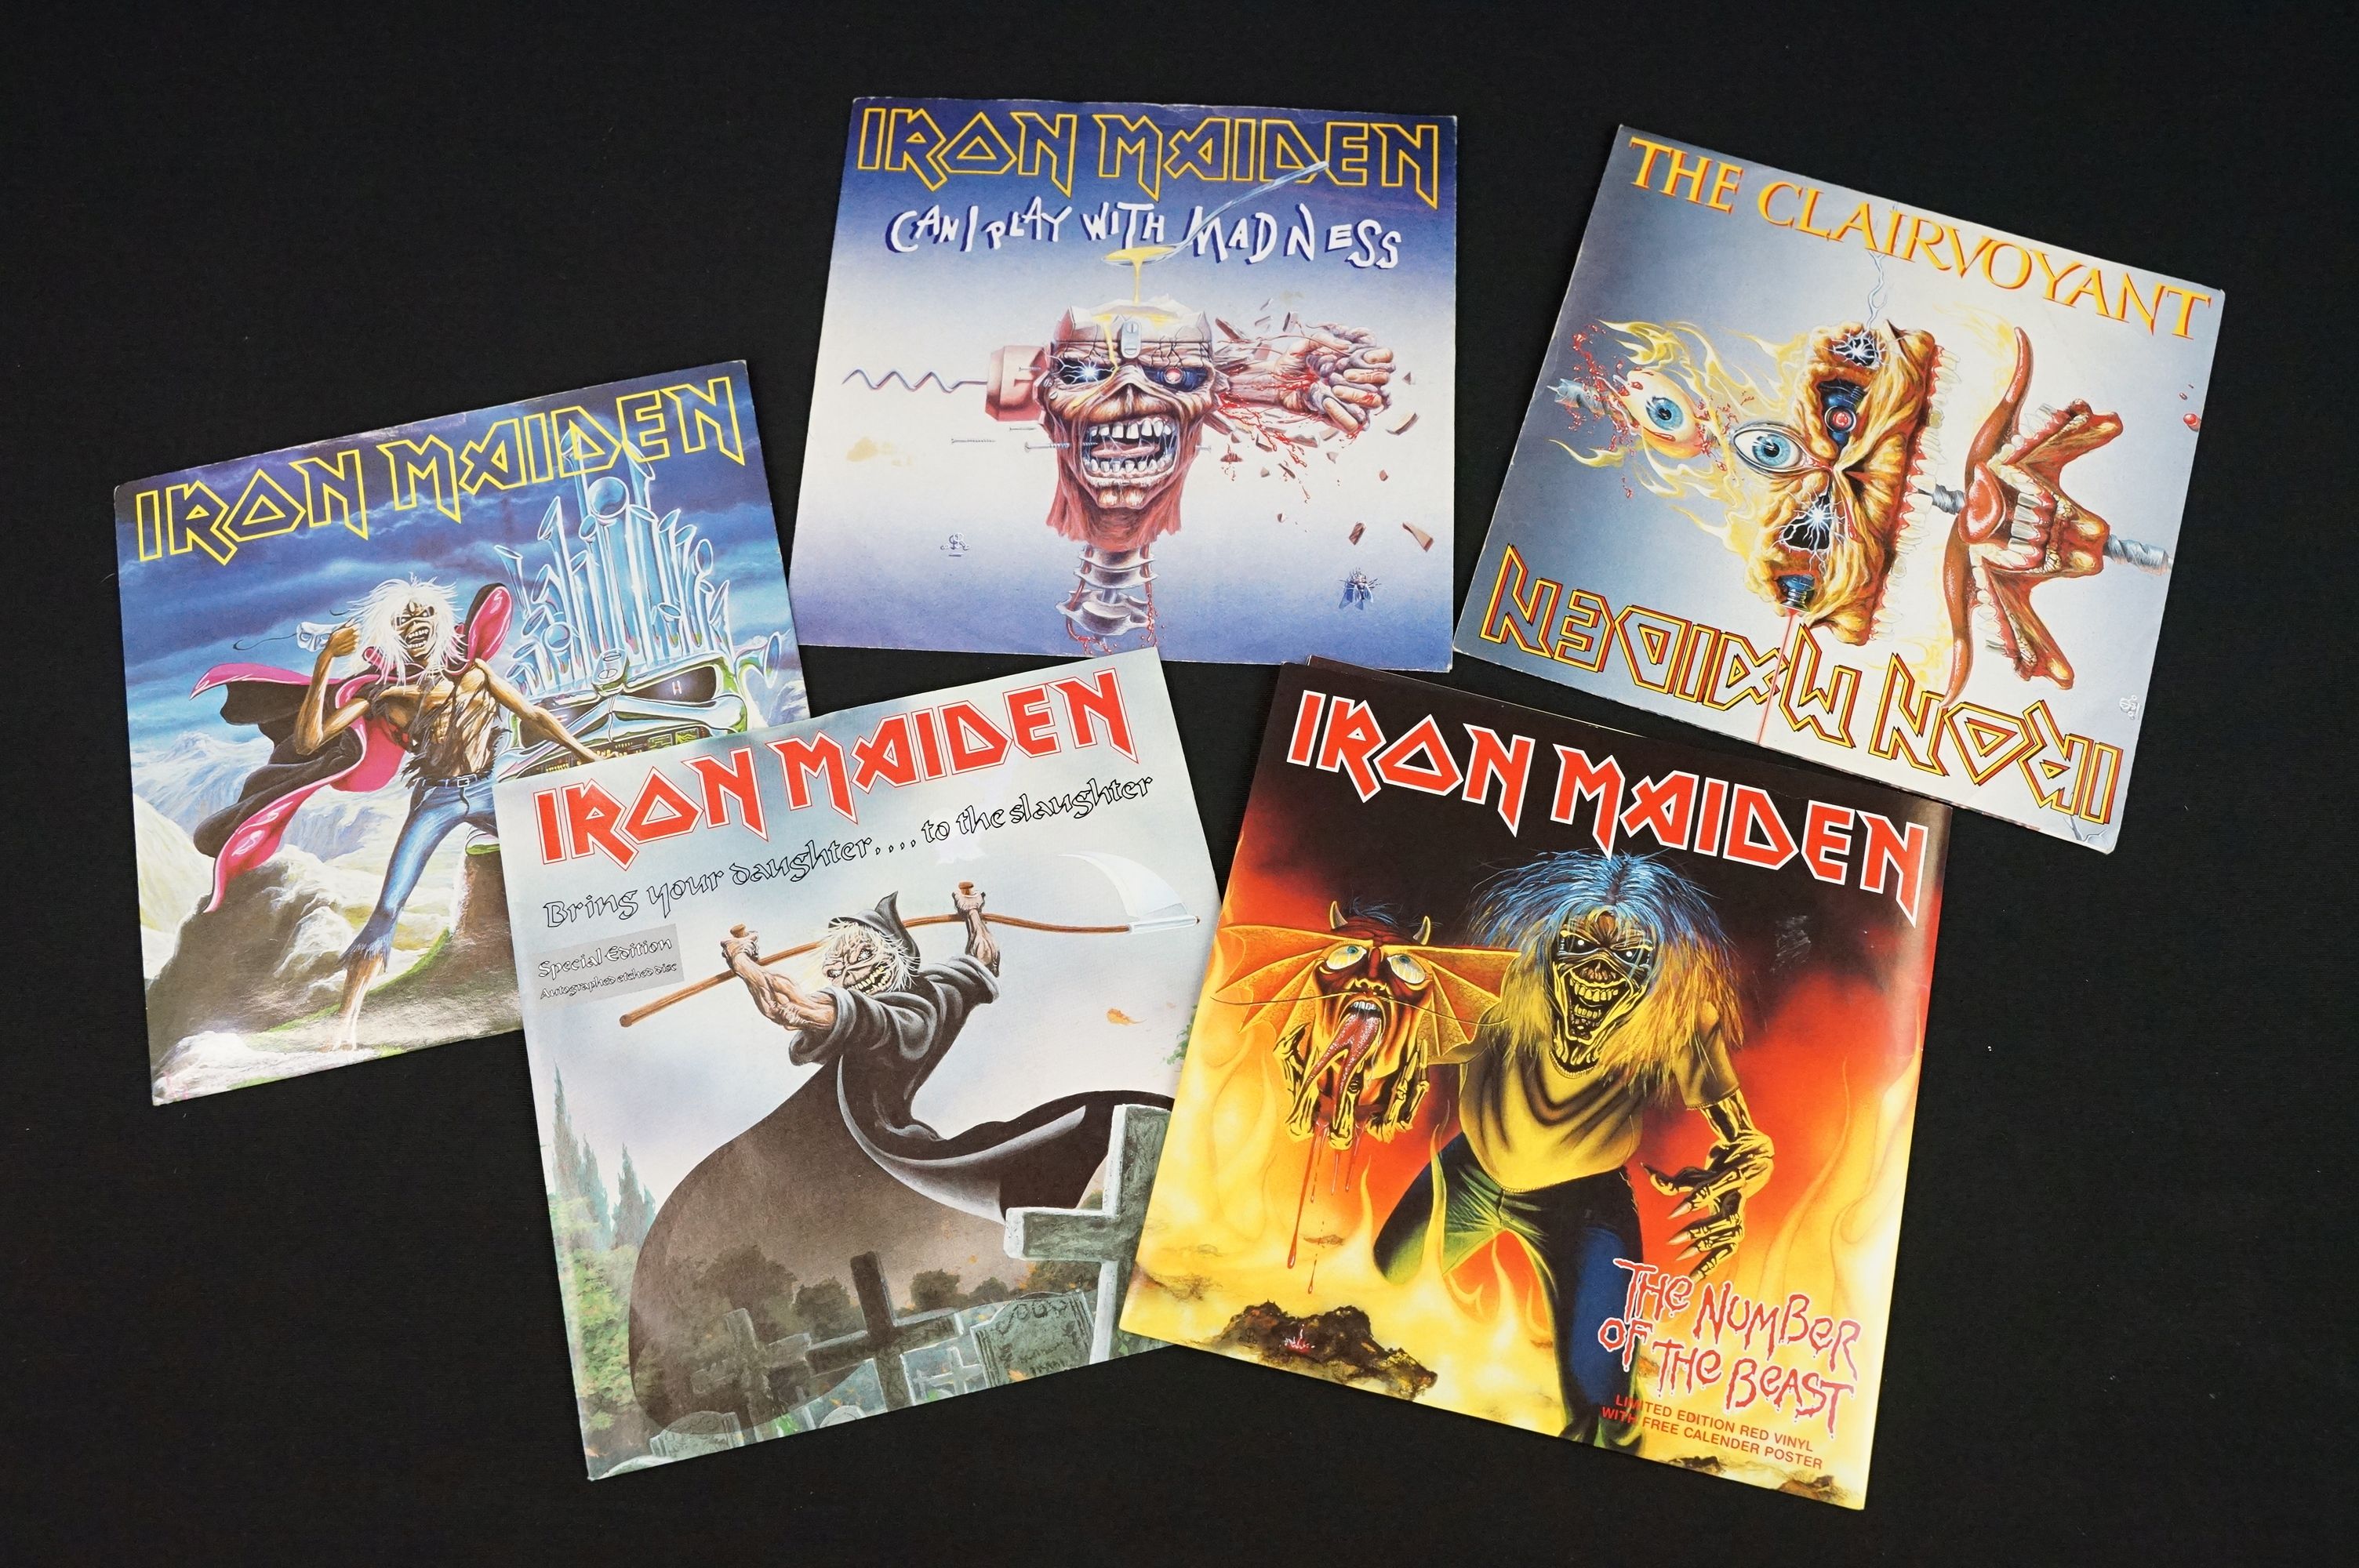 Vinyl - 2 Iron Maiden LPs, 3 12" (2 pic discs) and 5 7" singles to include Bring Your Daughter To - Image 2 of 3